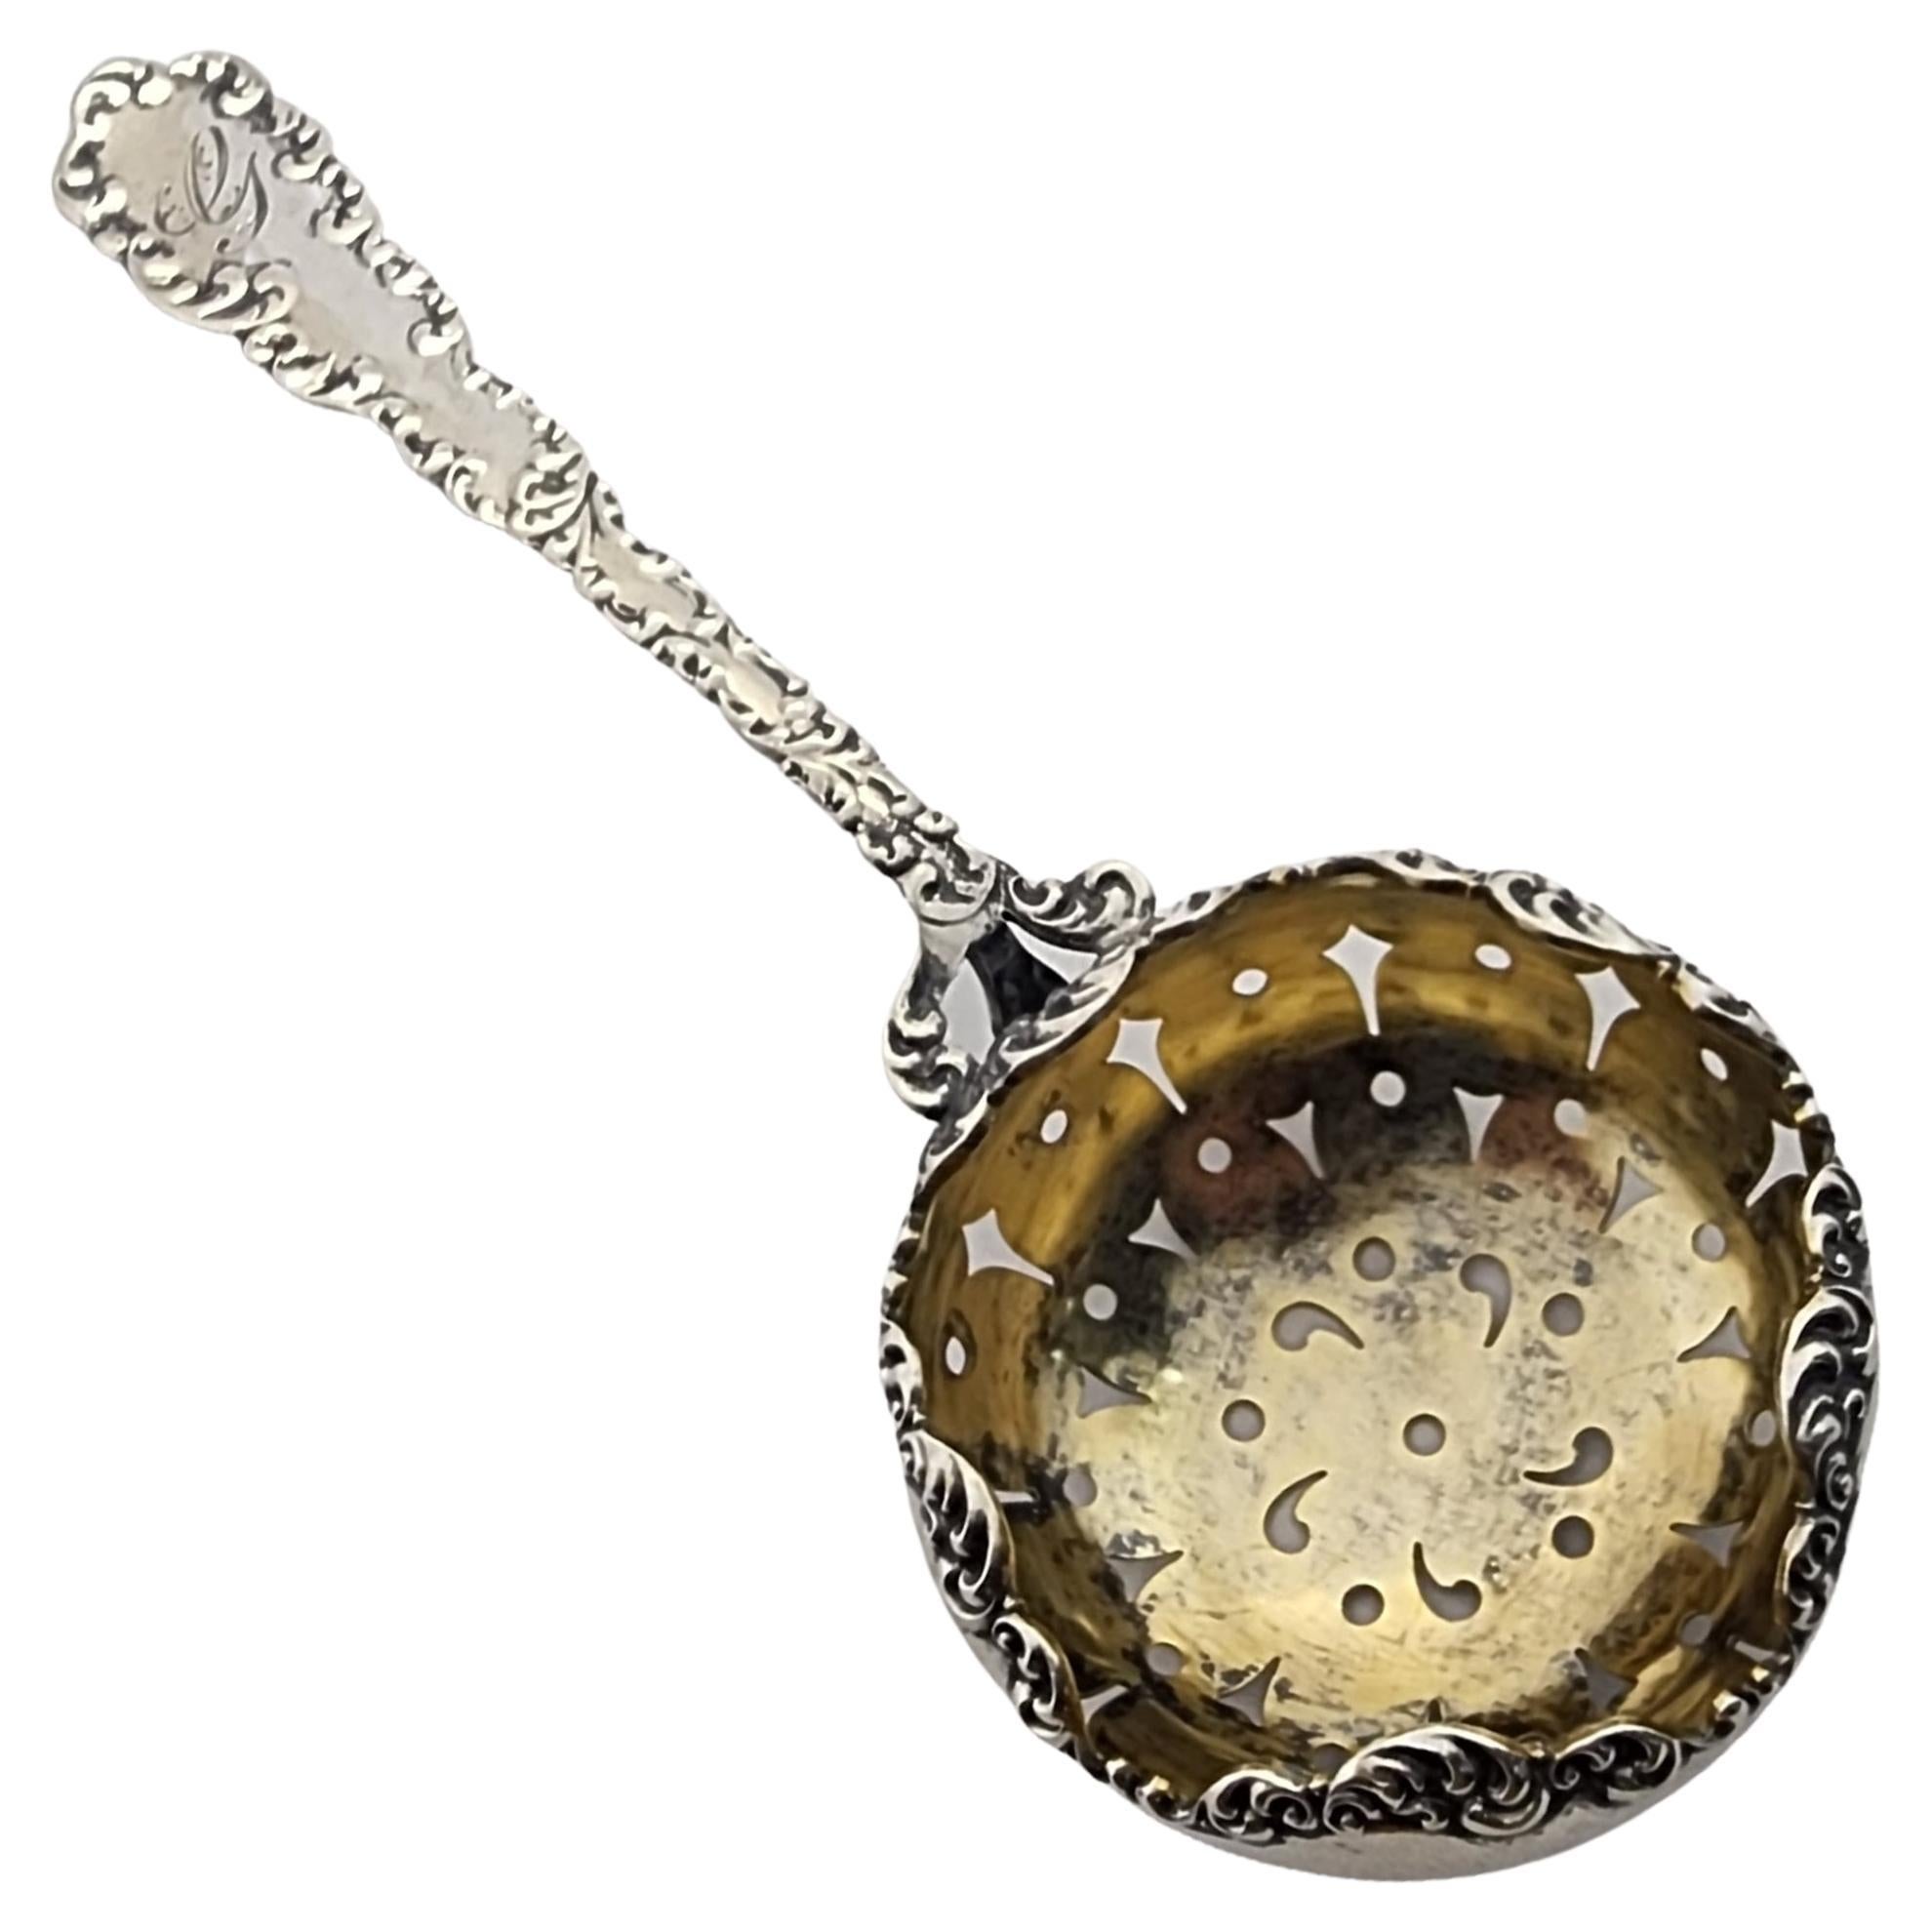 Wallace Sterling Silver Waverly Gold Wash Bowl Tea Strainer with Monogram